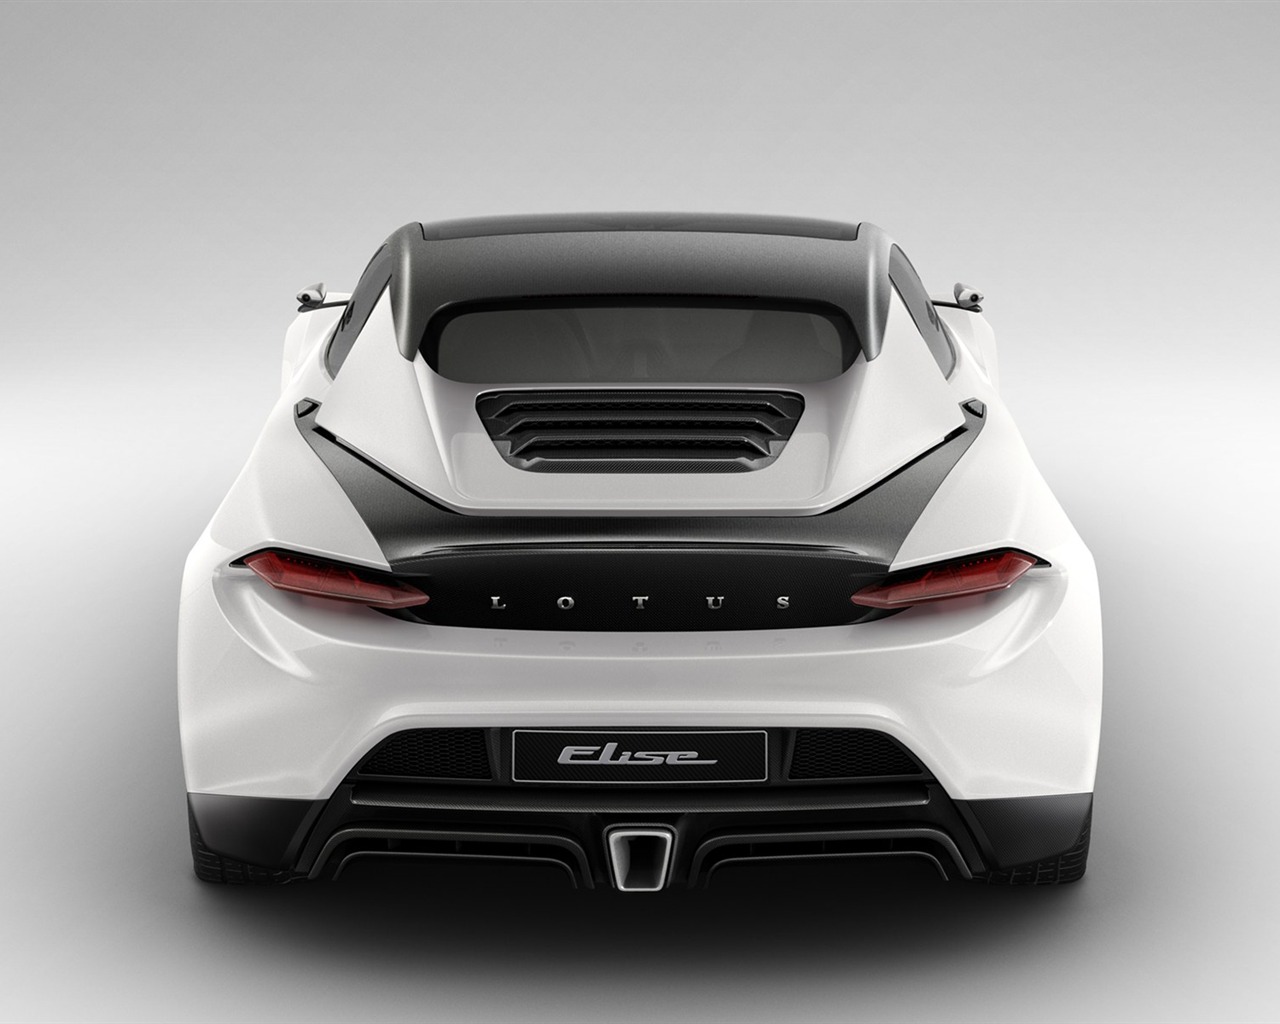 Special edition of concept cars wallpaper (15) #15 - 1280x1024